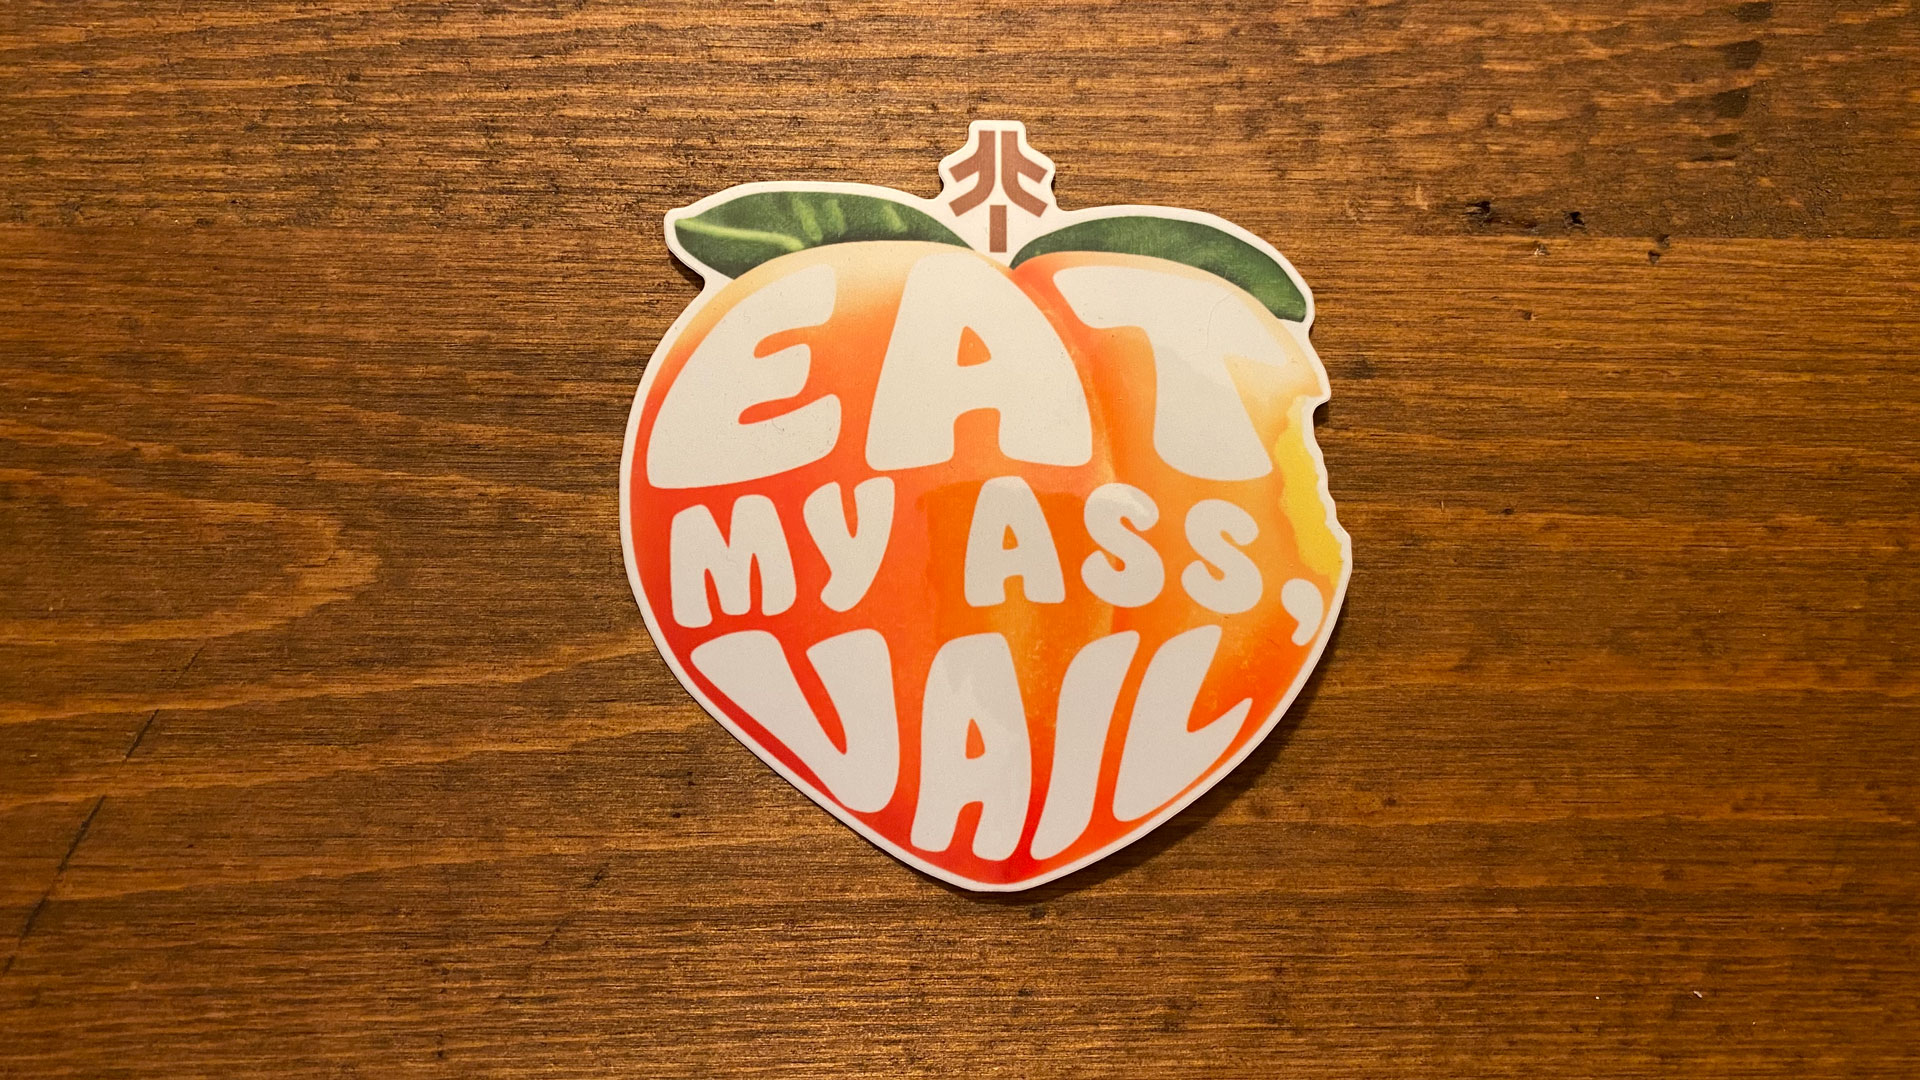 Vinyl Sticker with peach emoji graphic and text "Eat My Ass, Vail"